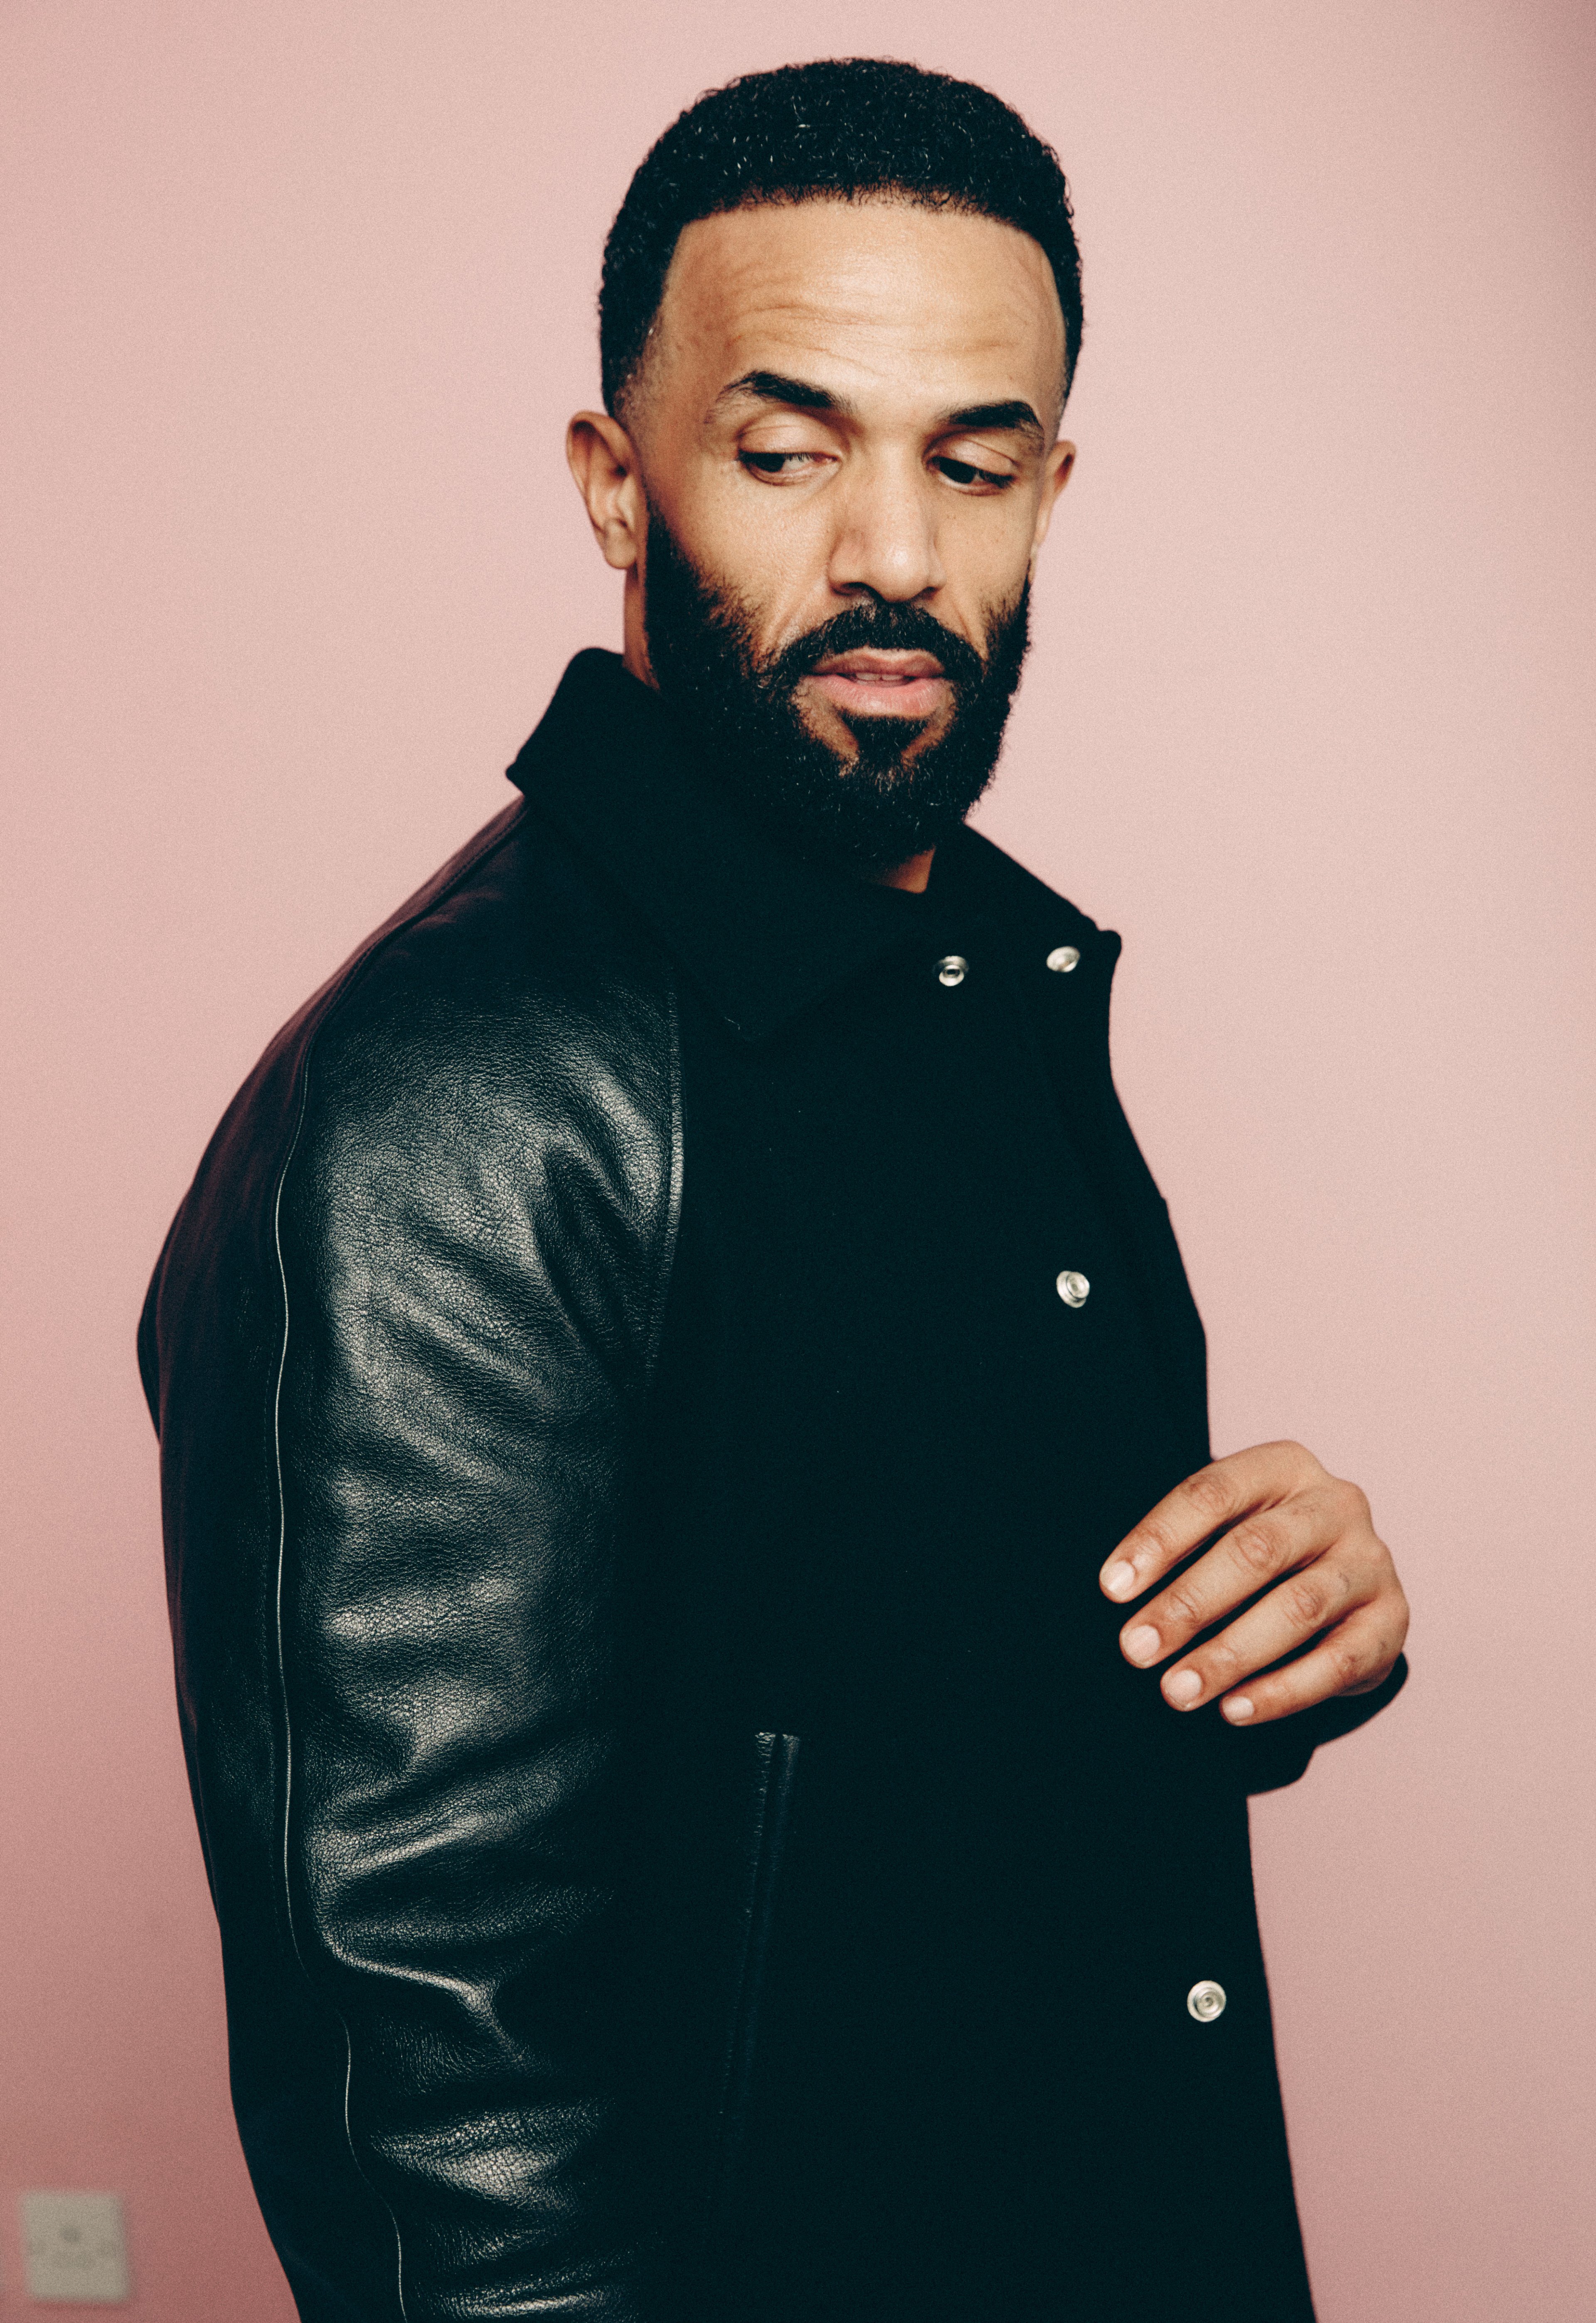 A man with a neat beard, wearing a black jacket, stands before a pink background. He is holding the jacket and gazing at the camera.